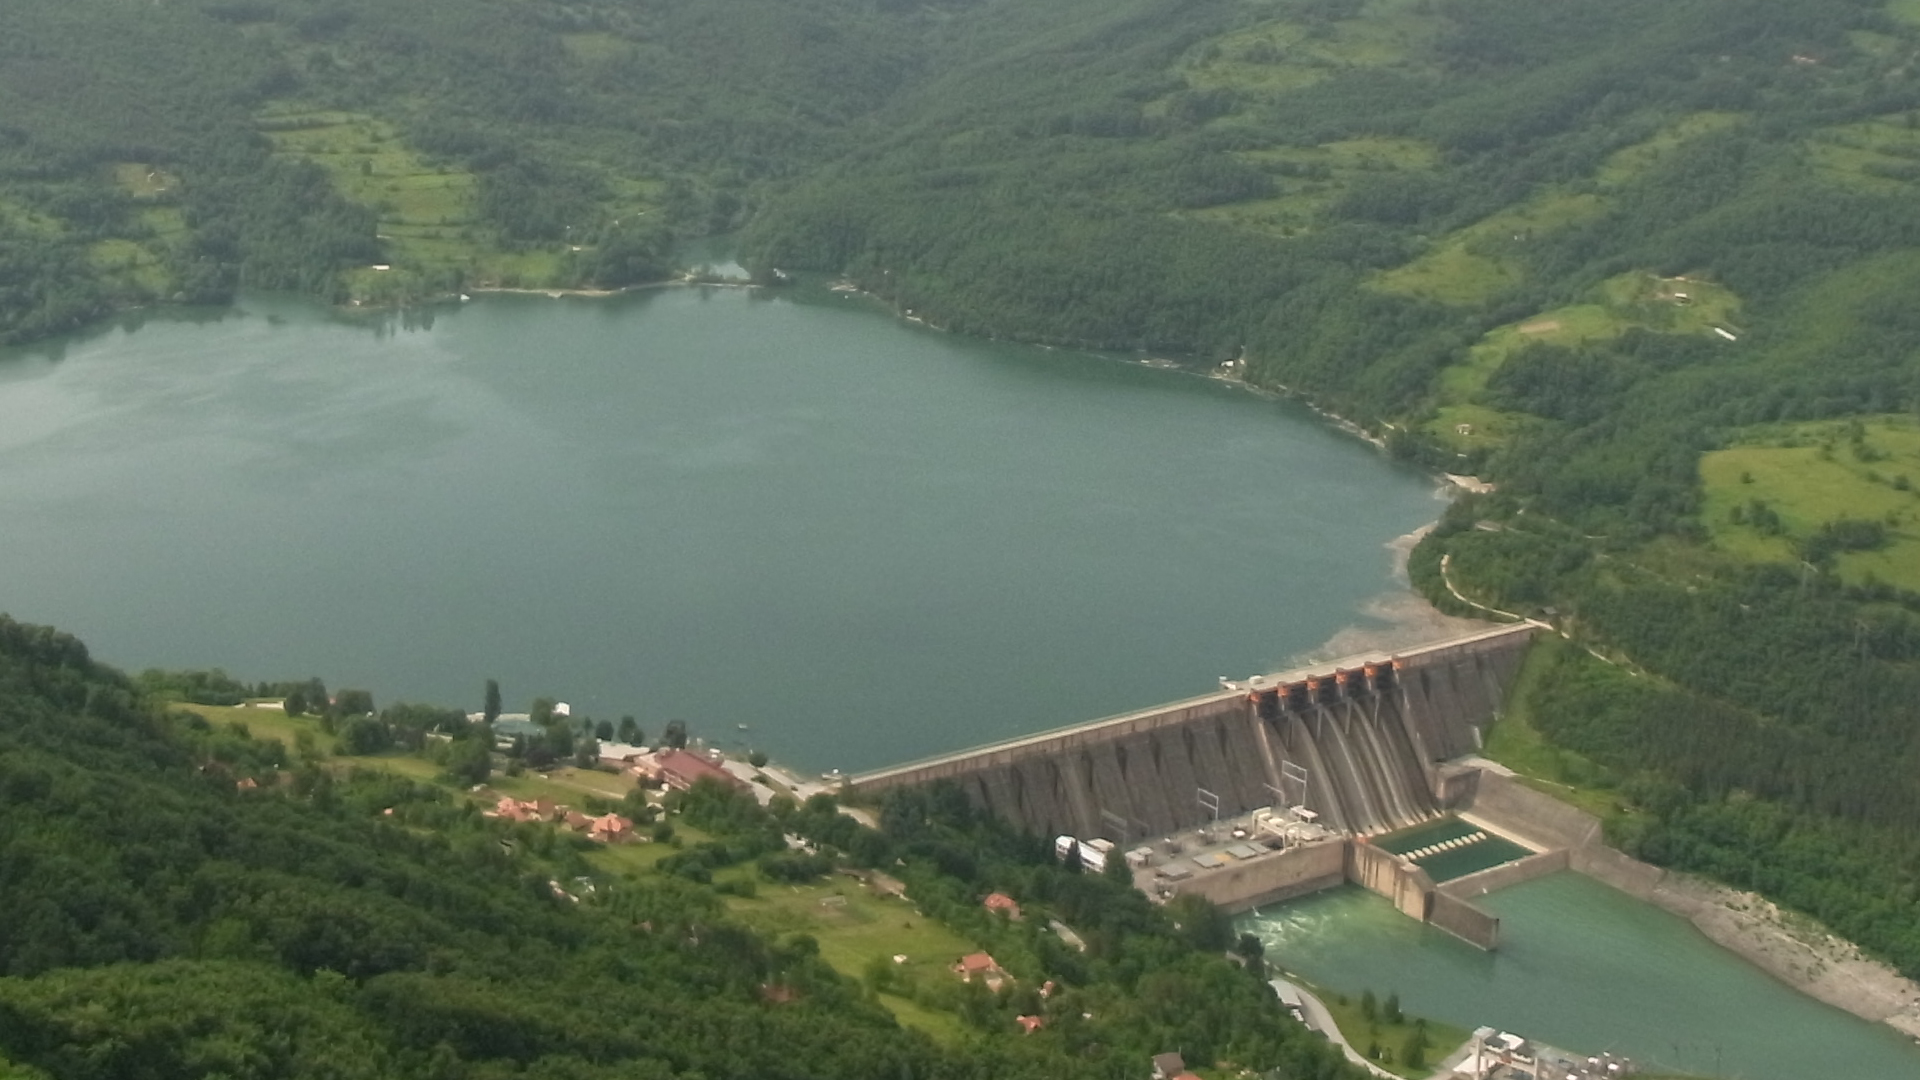 Hydro power generation technologies that best suit the topographical conditions and customer needs • What is hydro power? • Clean energy • Adjustable speed pumped-storage power generation system that excels in supply-demand adjustment 